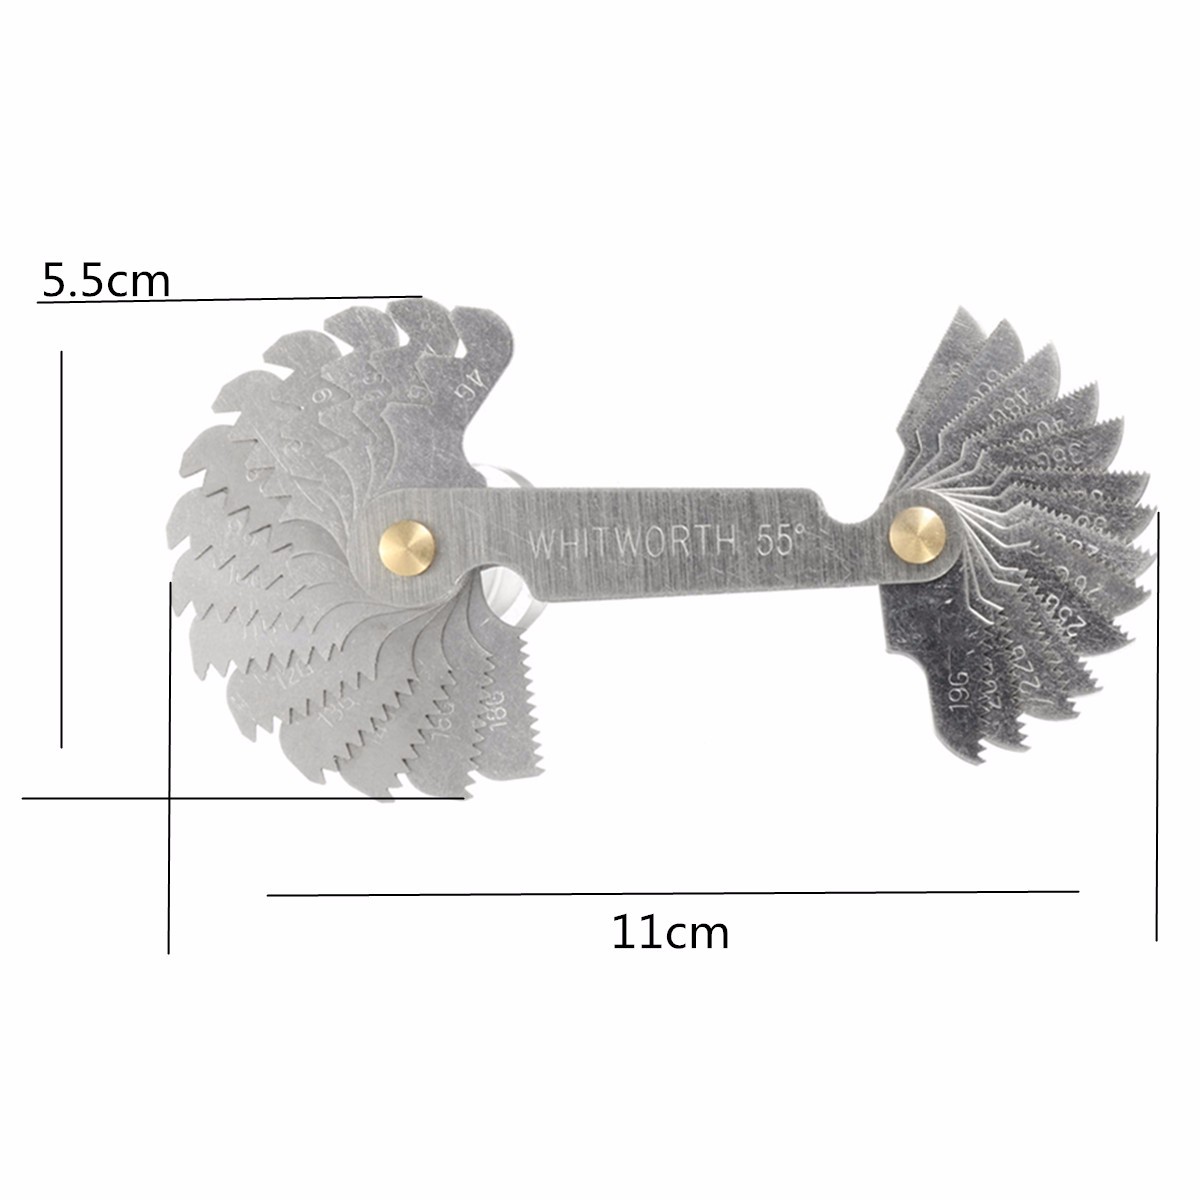 Metric-Whitworth-5560-Degree-Thread-Screw-Pitch-Gauge-With-3x-Centre-Gages-1092555-2